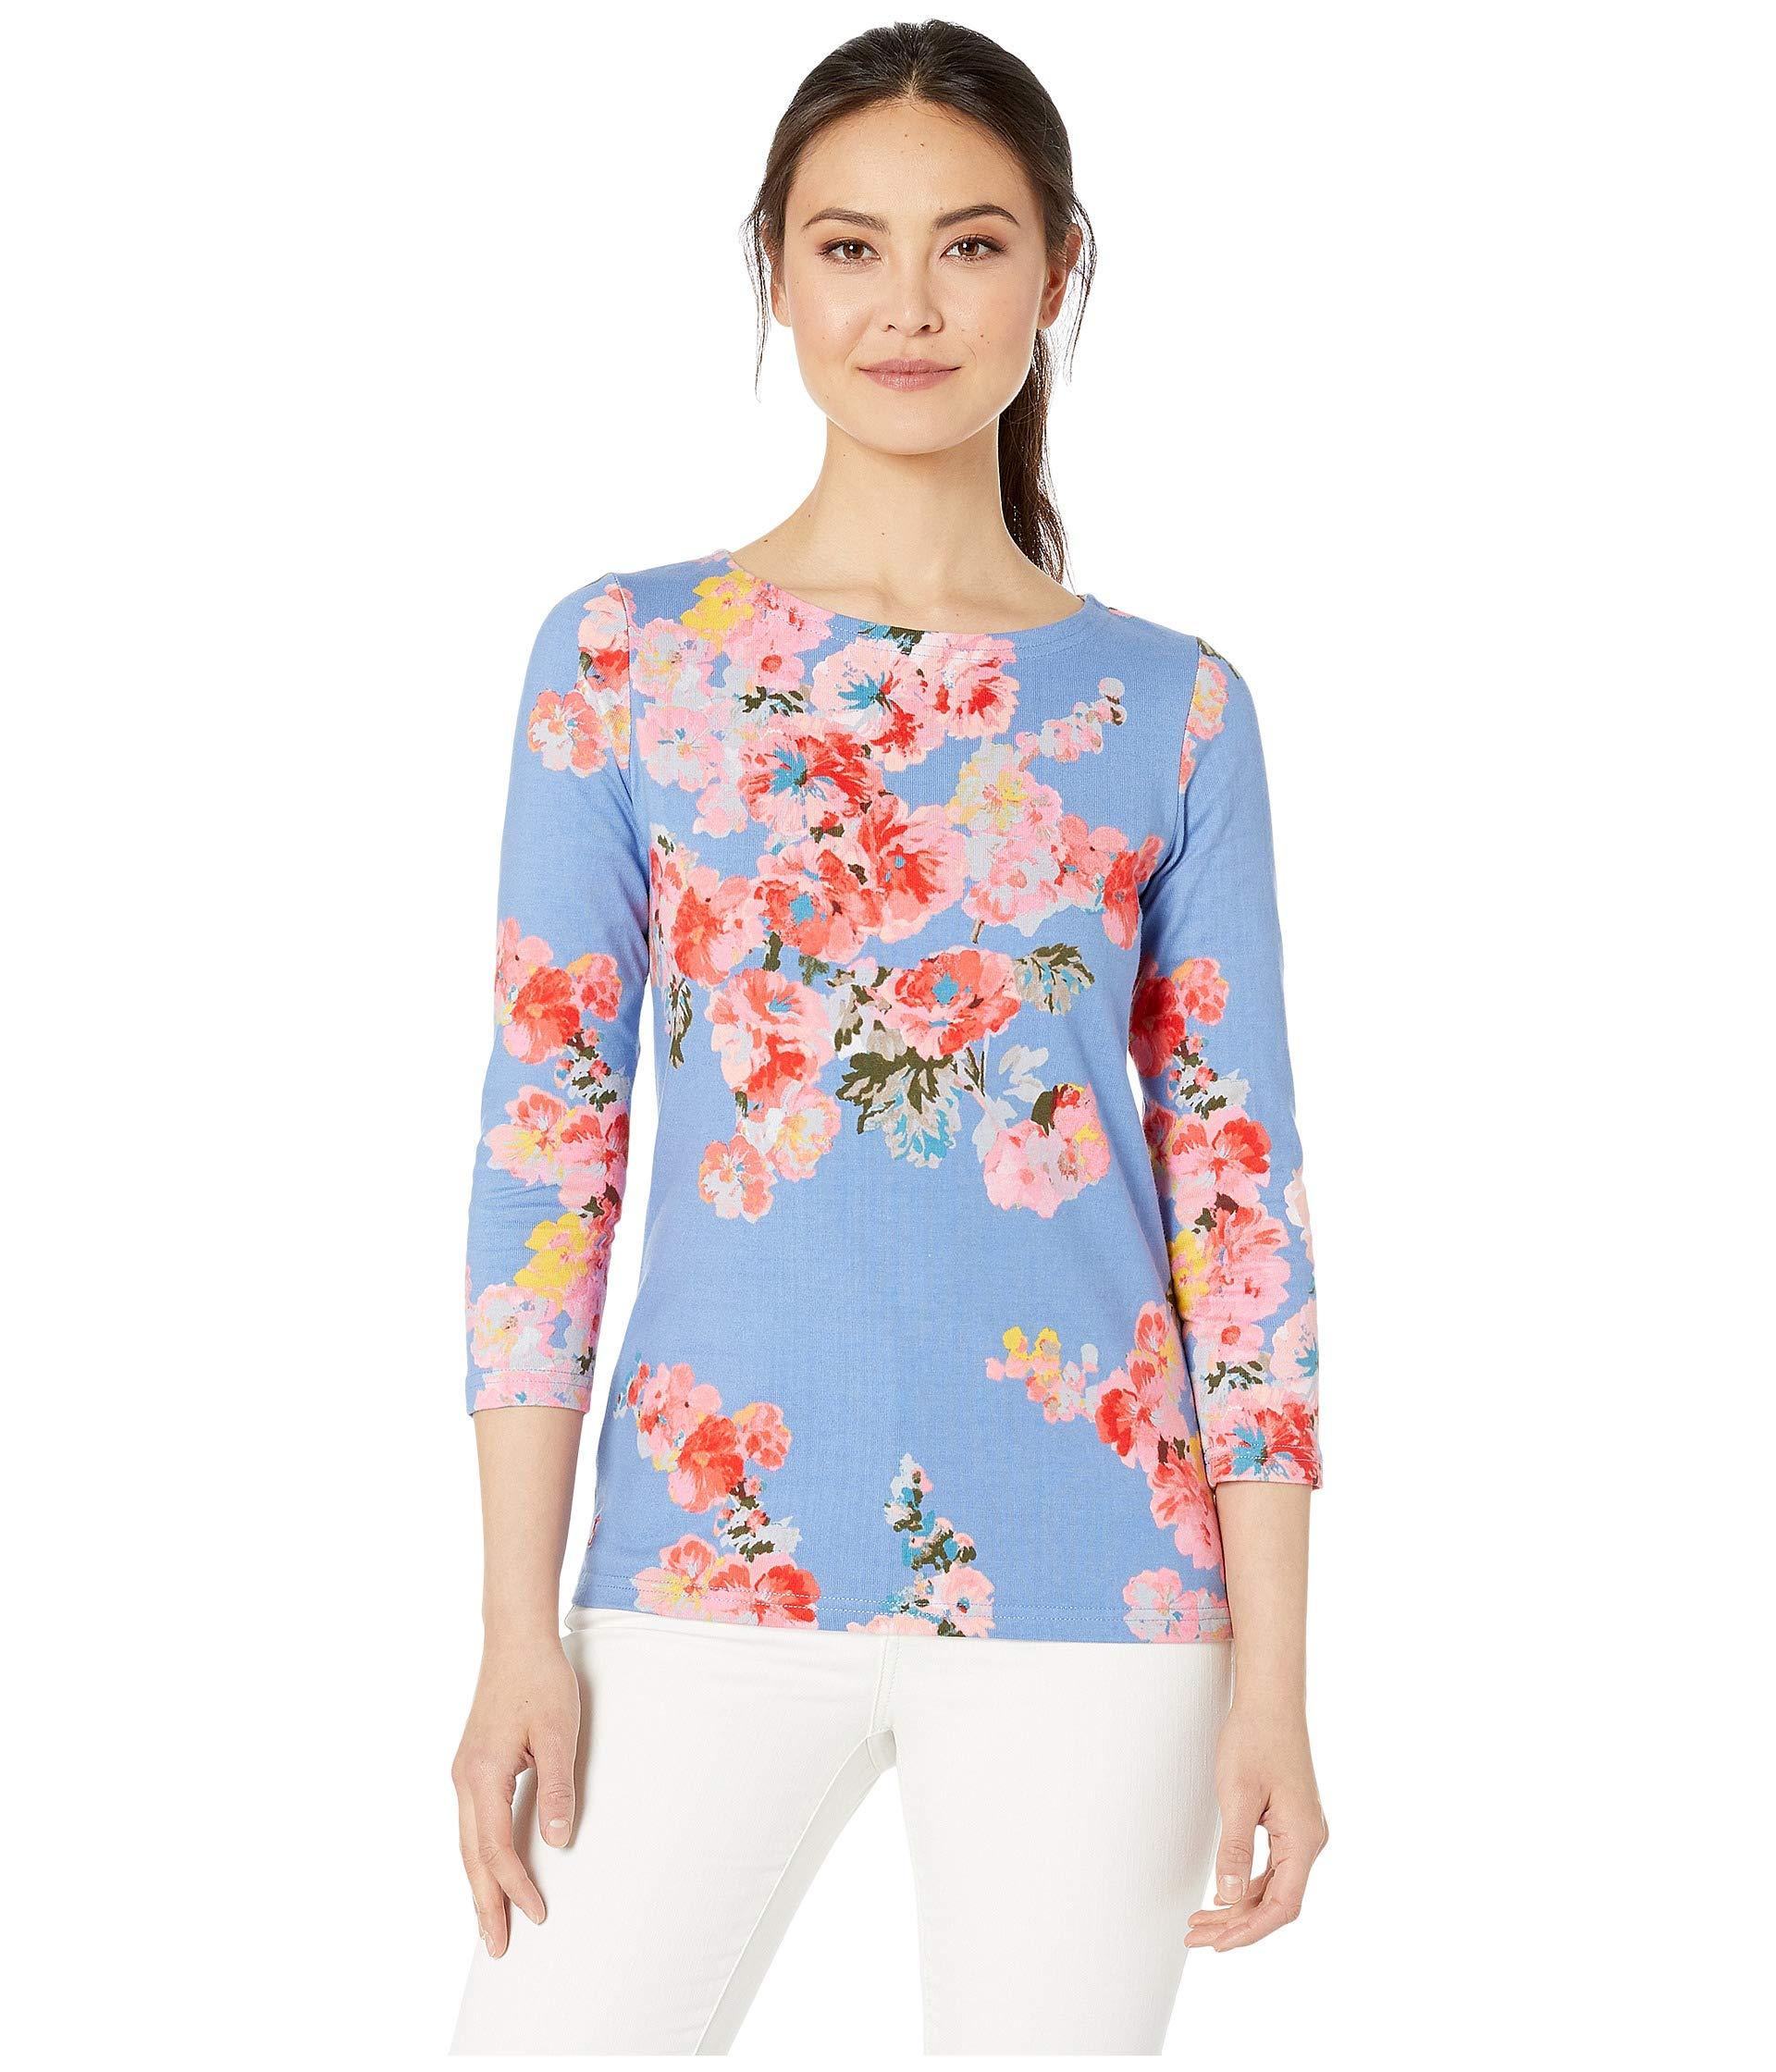 Joules Cotton Harbour Print Jersey Top in Blue Floral (Blue) - Save 18% ...